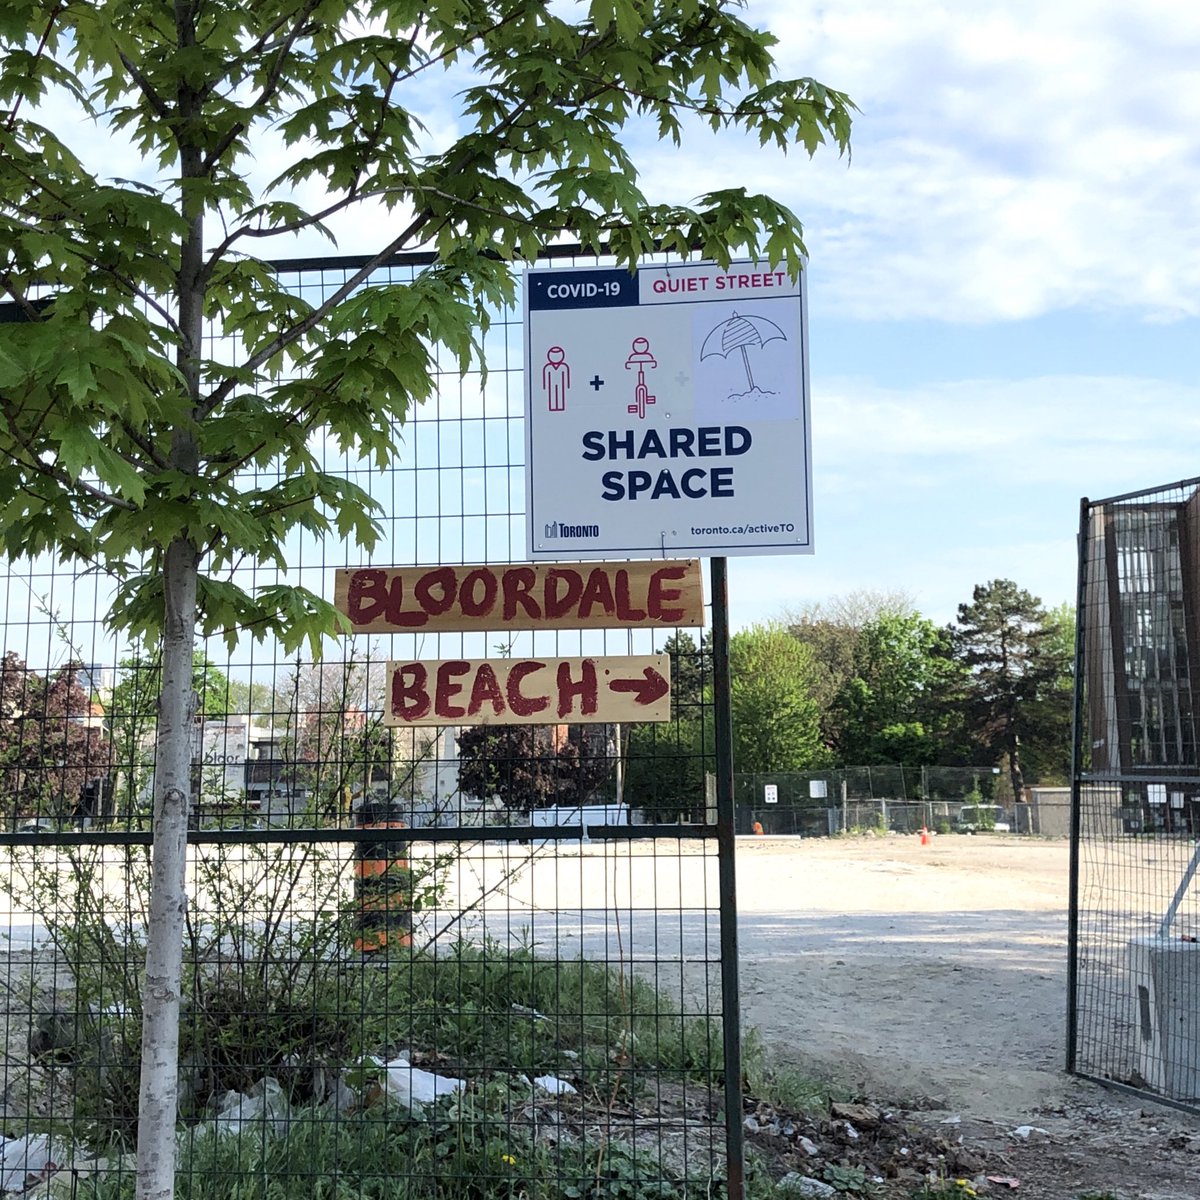 Bloordale Beach was only open for about 12 hours before it got shut down. It was only open Mon 8pm to Tuesday 8am! But I heard there were efforts to reopen the beach last night and it should be available for beach-going once again.